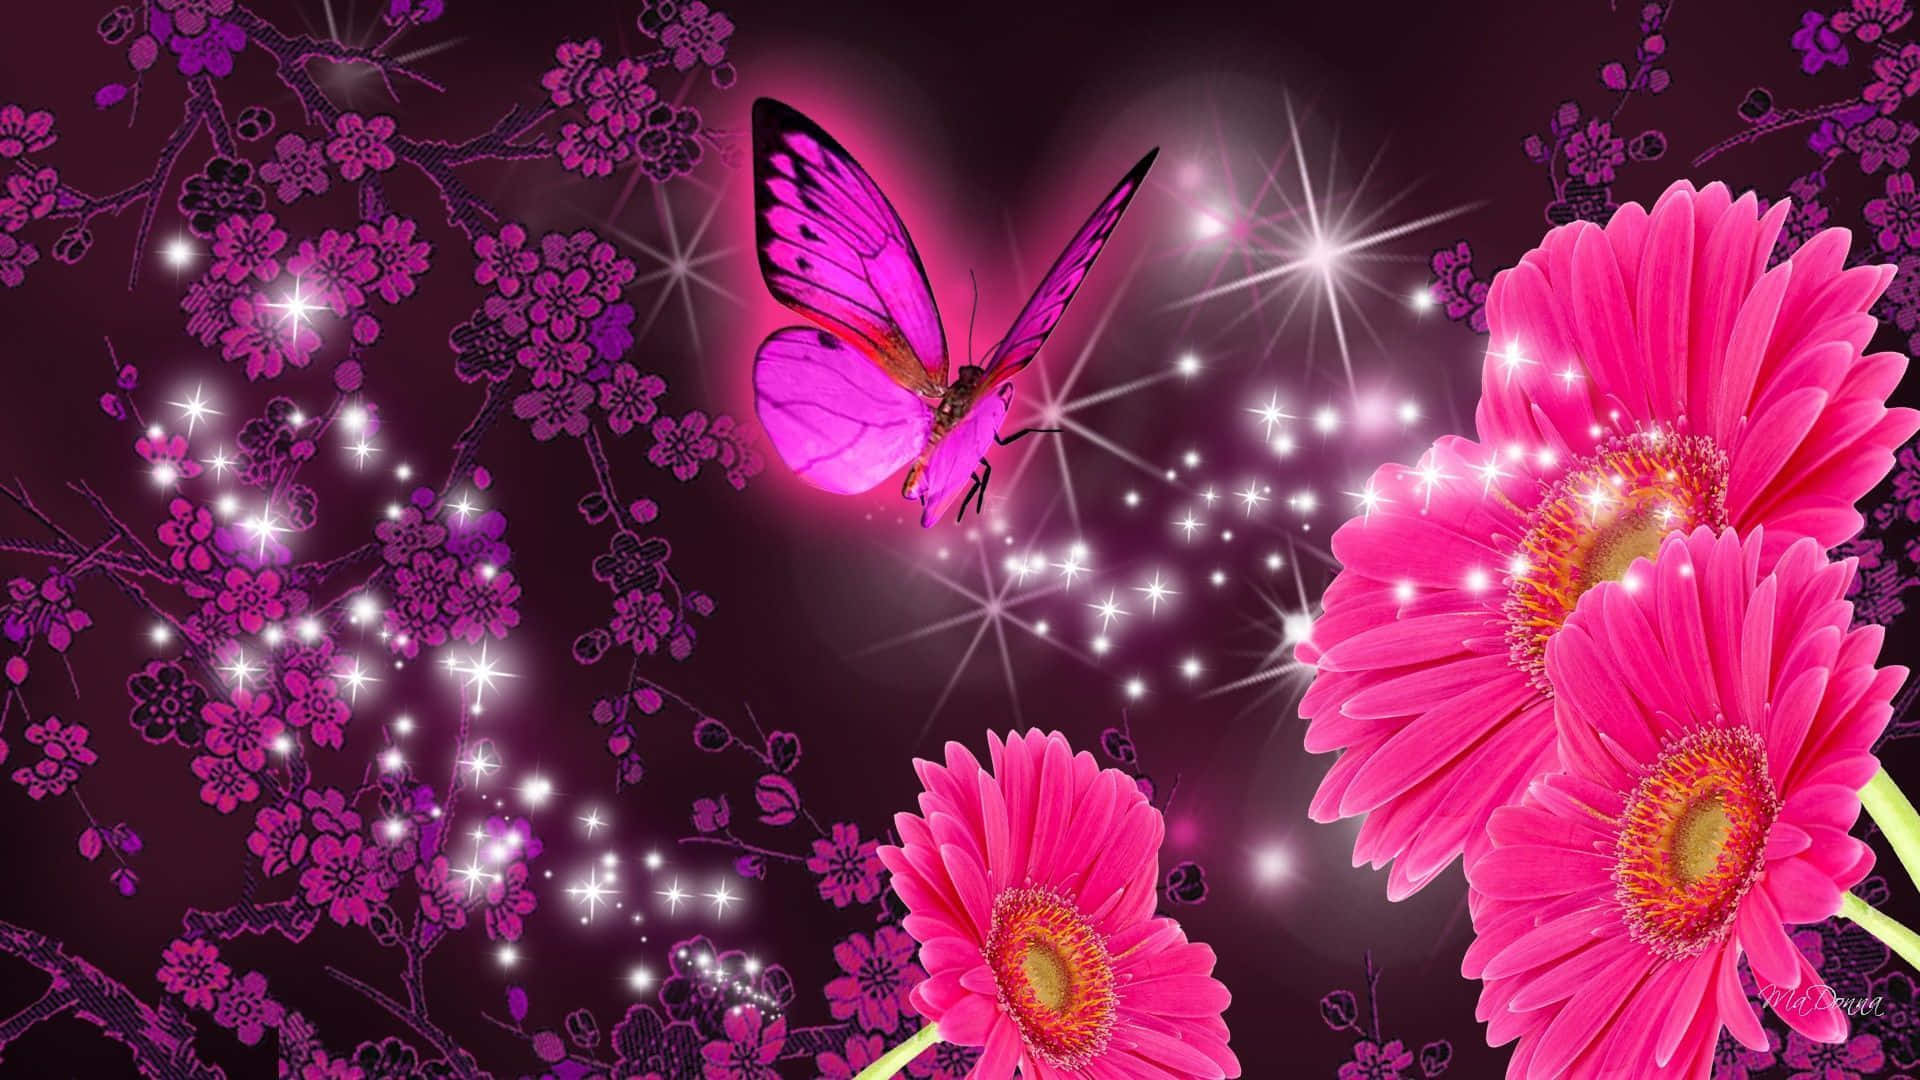 A sparkling pink butterfly is a sign of hope and beauty. Wallpaper